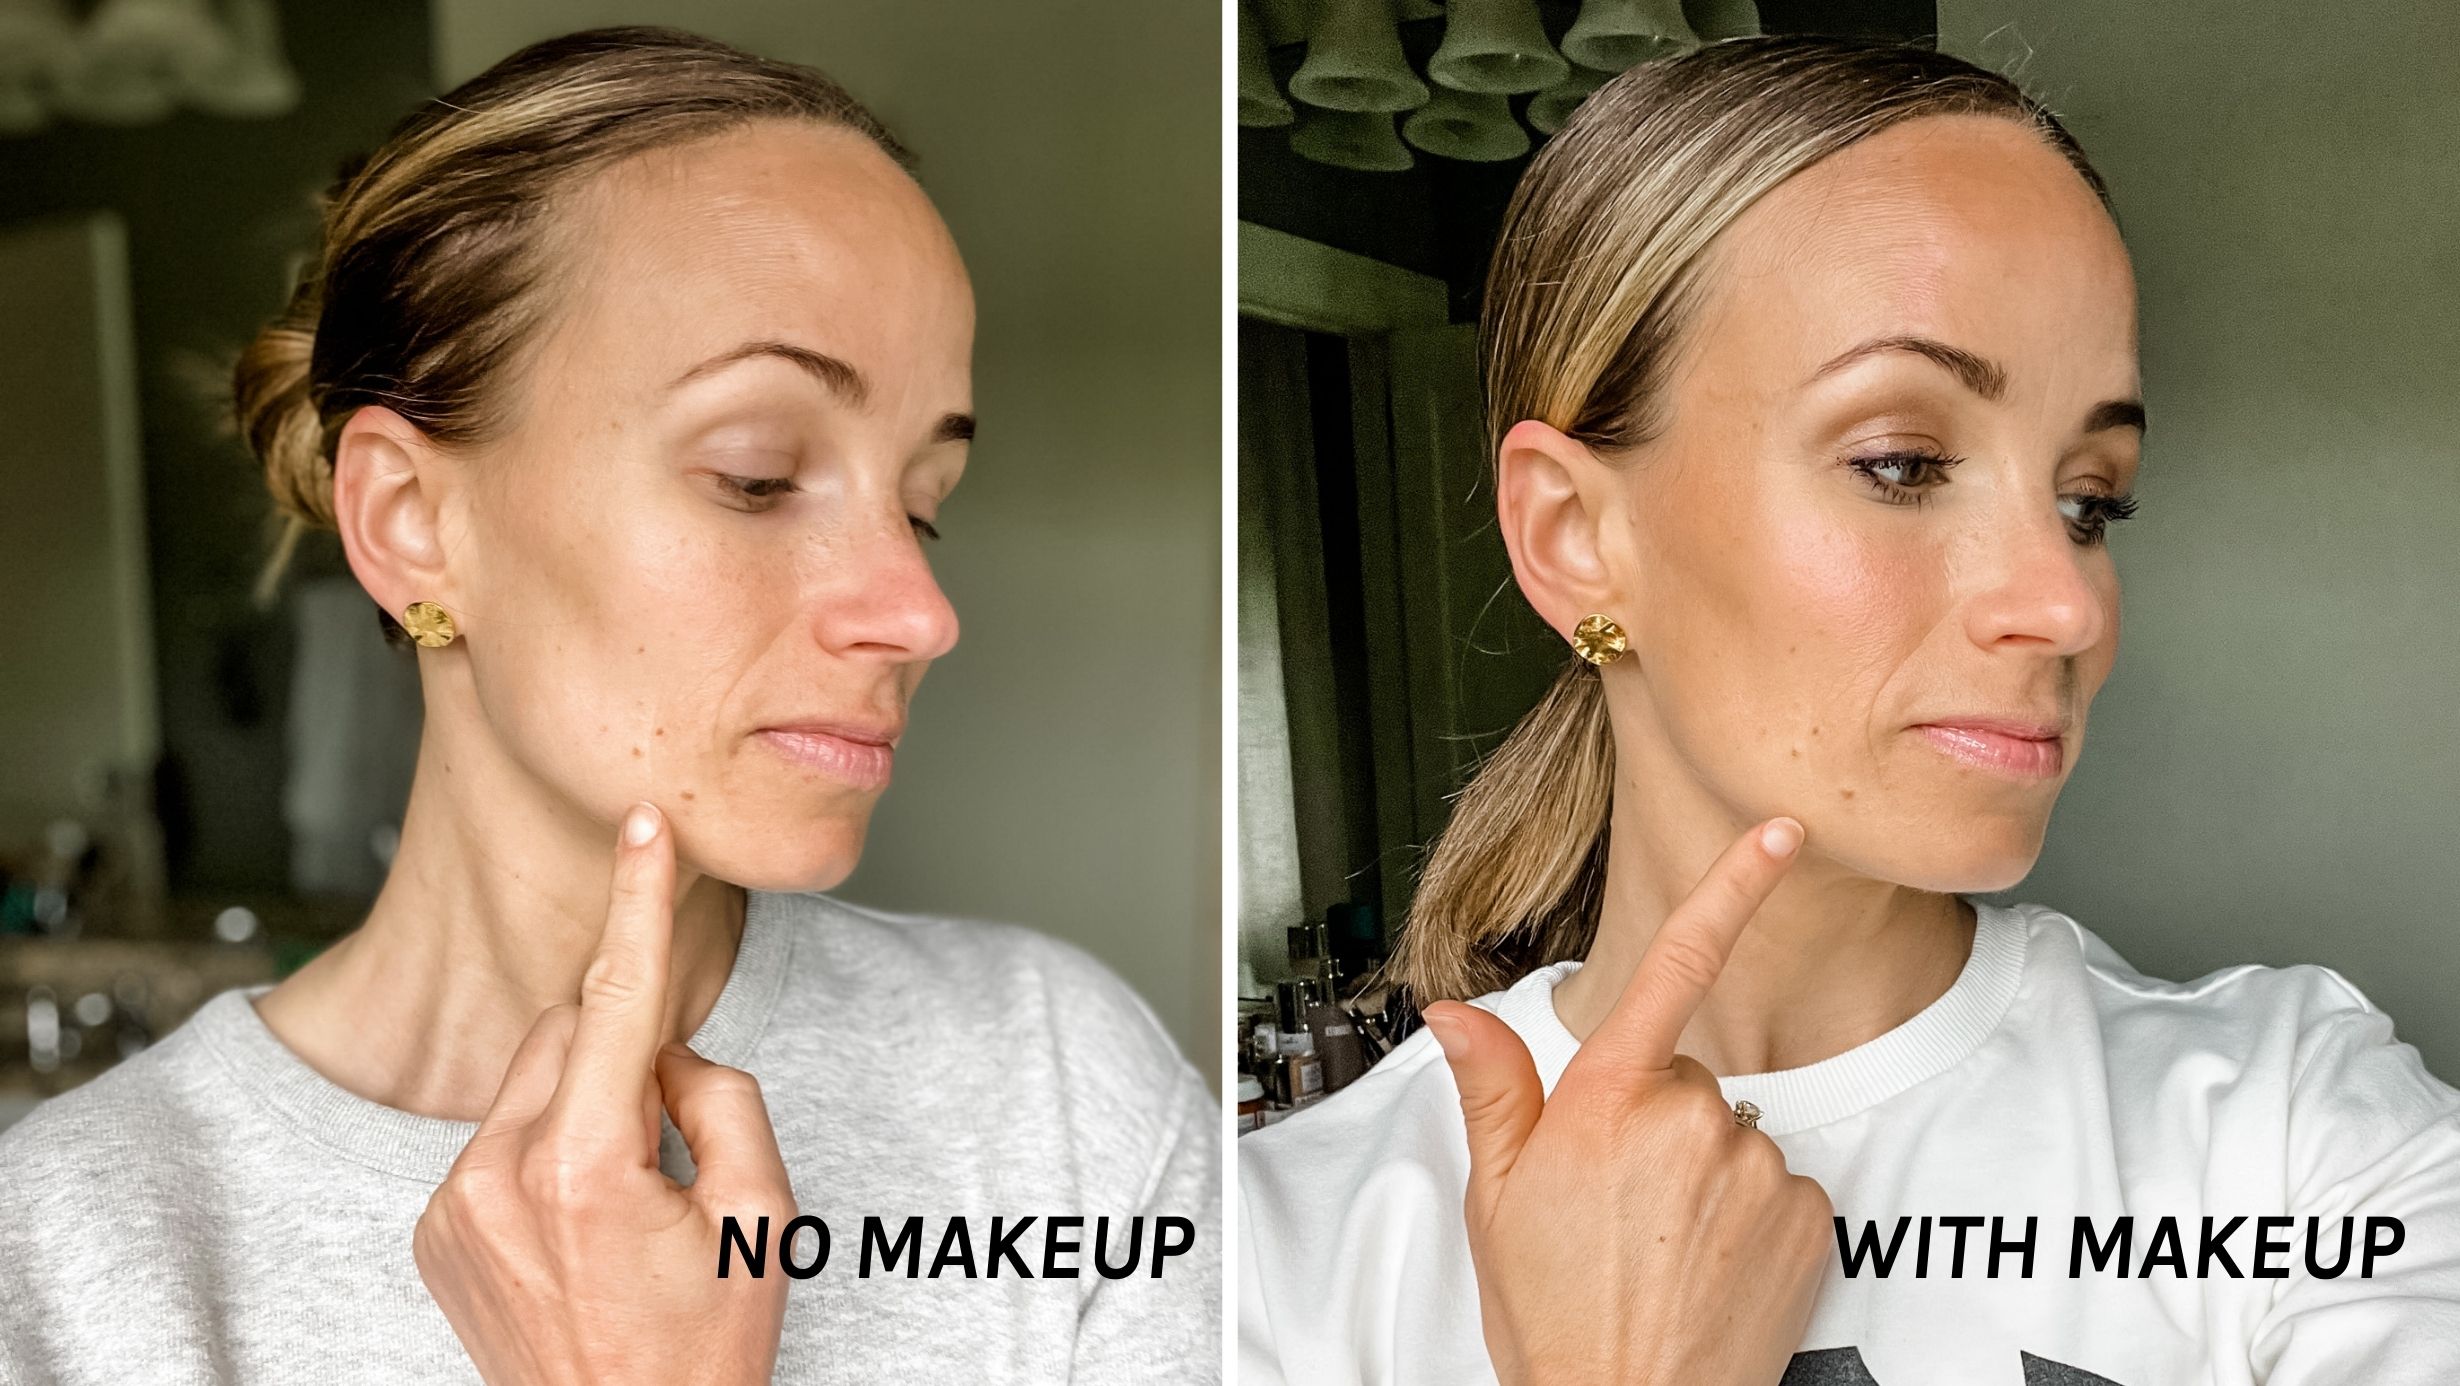 TeriLyn Adams showing her skin with no makeup and with makeup using SkinMedica TNS Advanced Serum